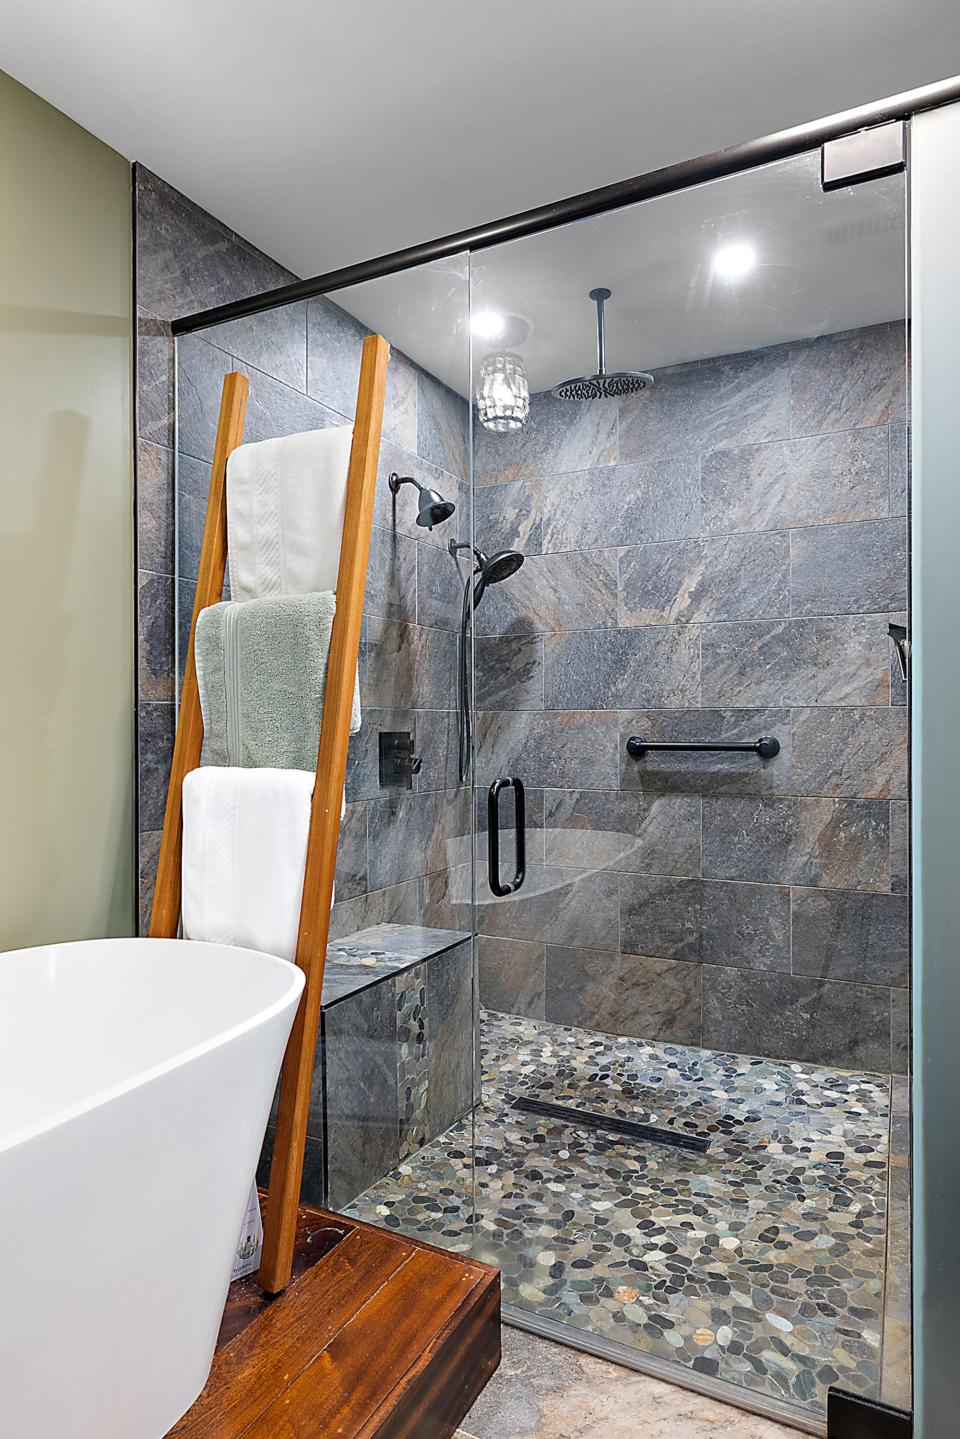 Euro-glass shower and soaking tub at 2222 Puritan in Detroit.